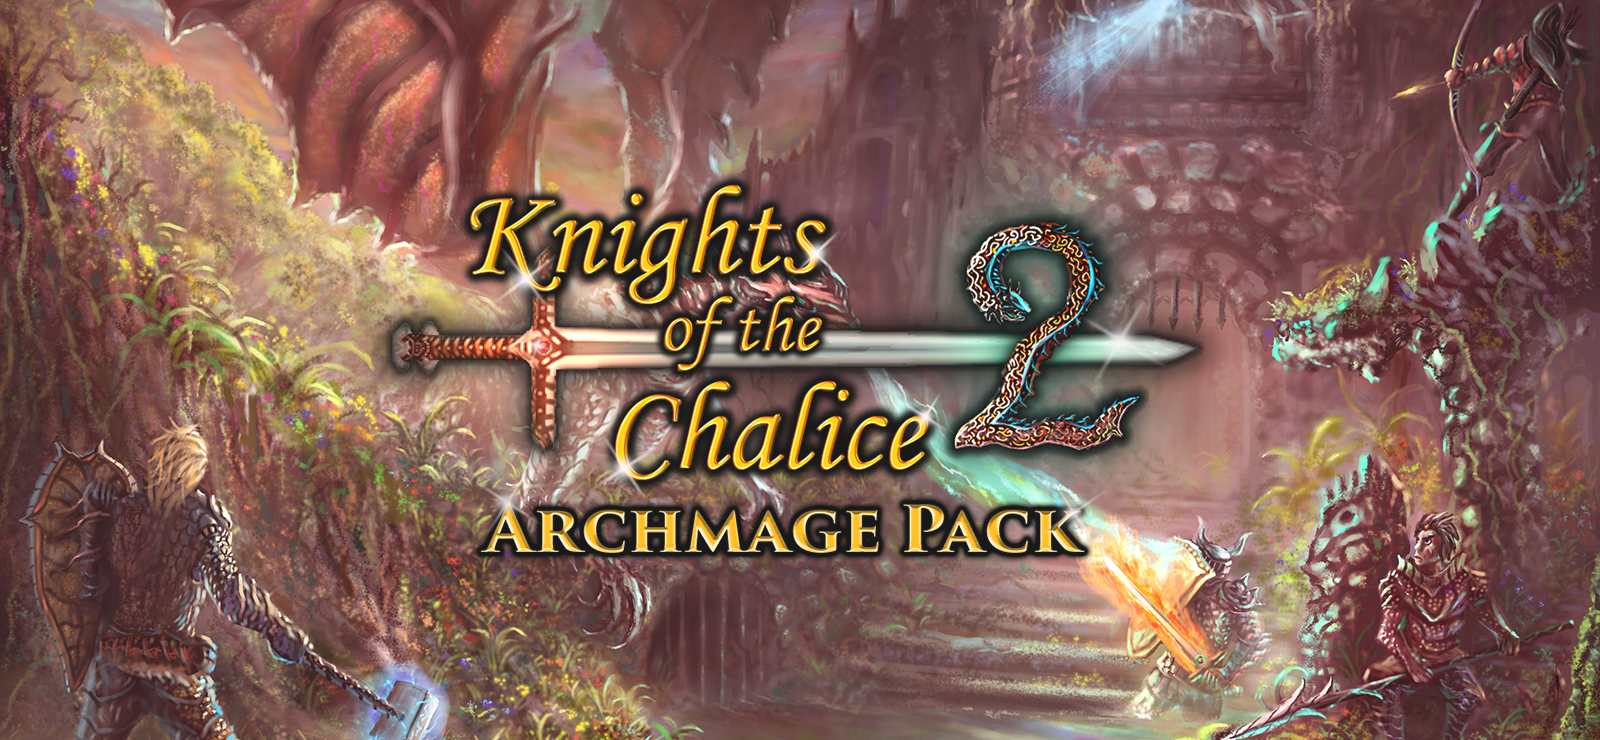 Knights Of The Chalice 2 - Archmage Pack